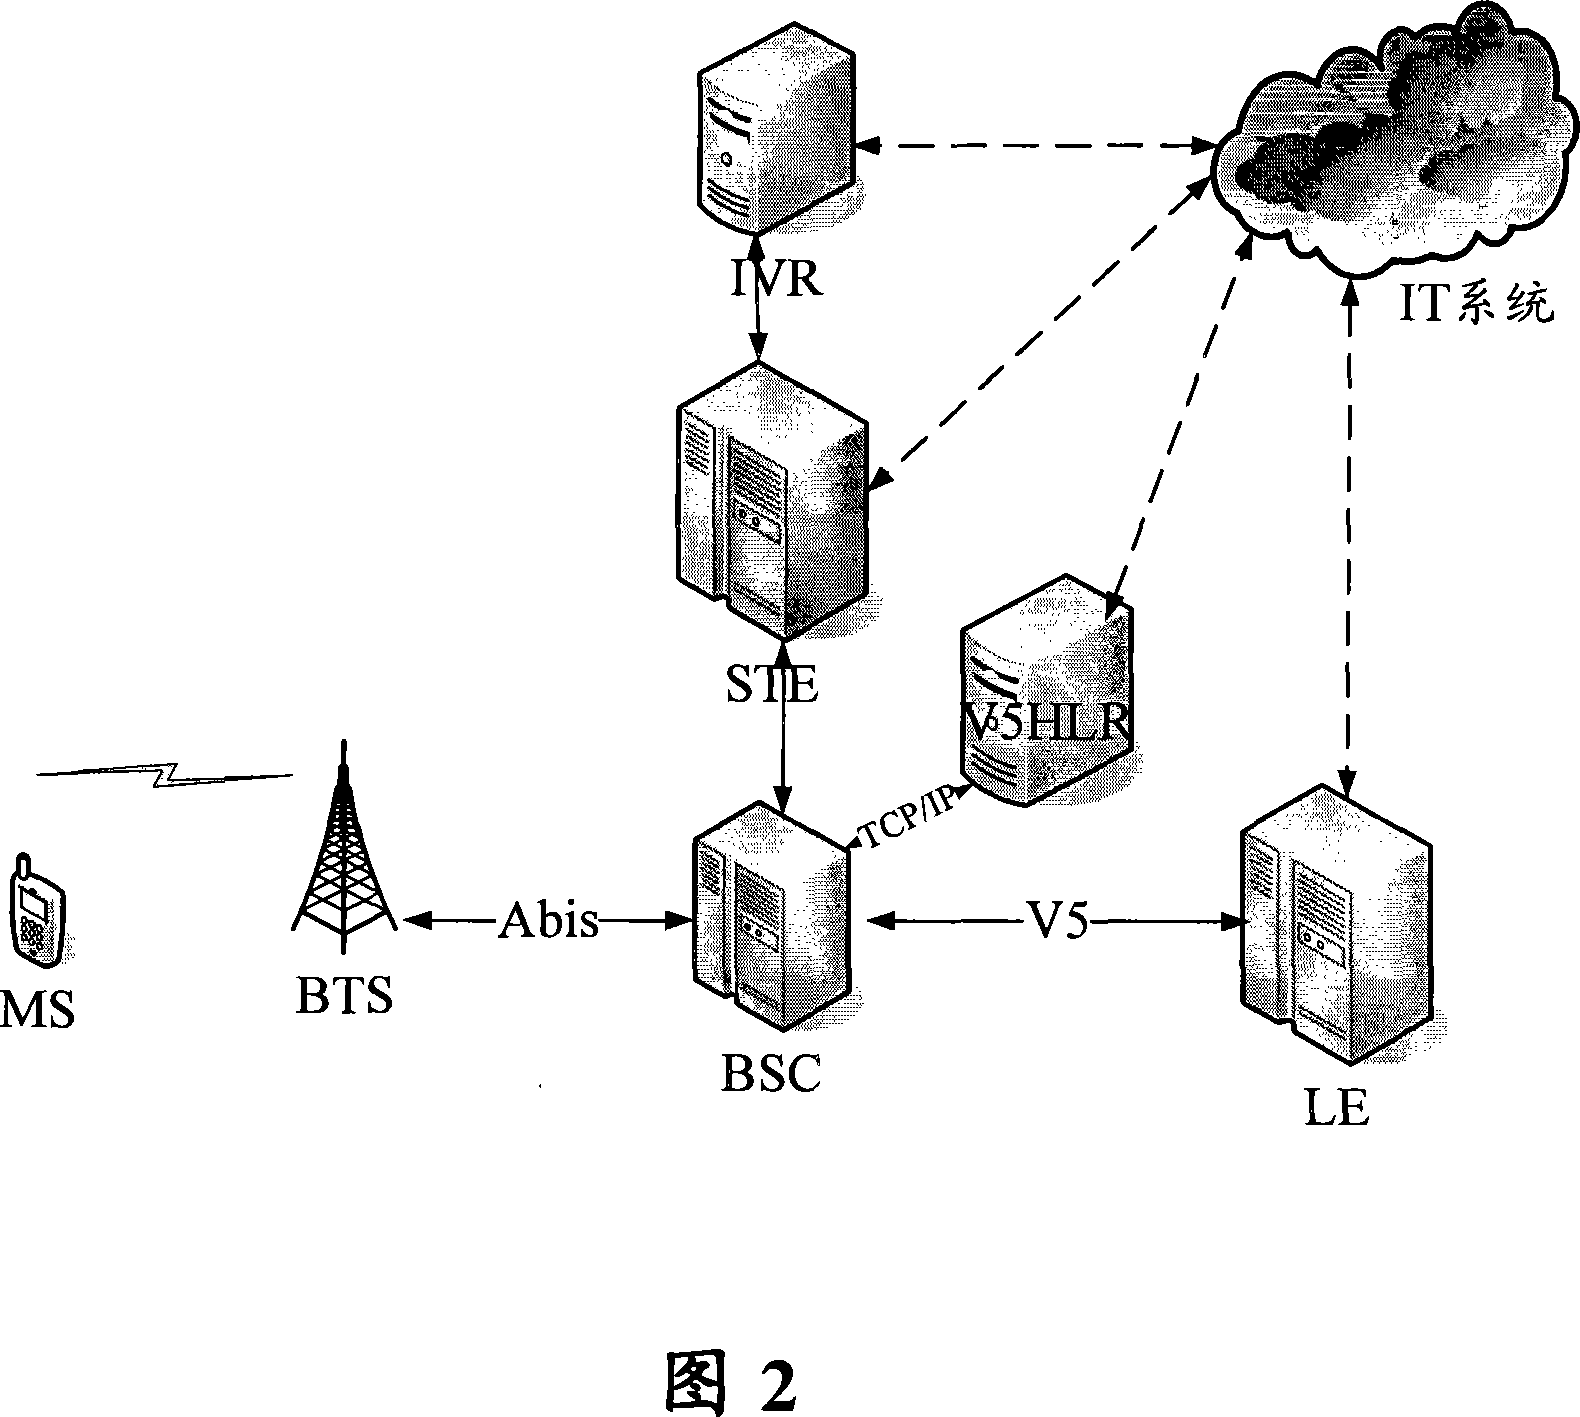 User activating method for wireless local loop communication system